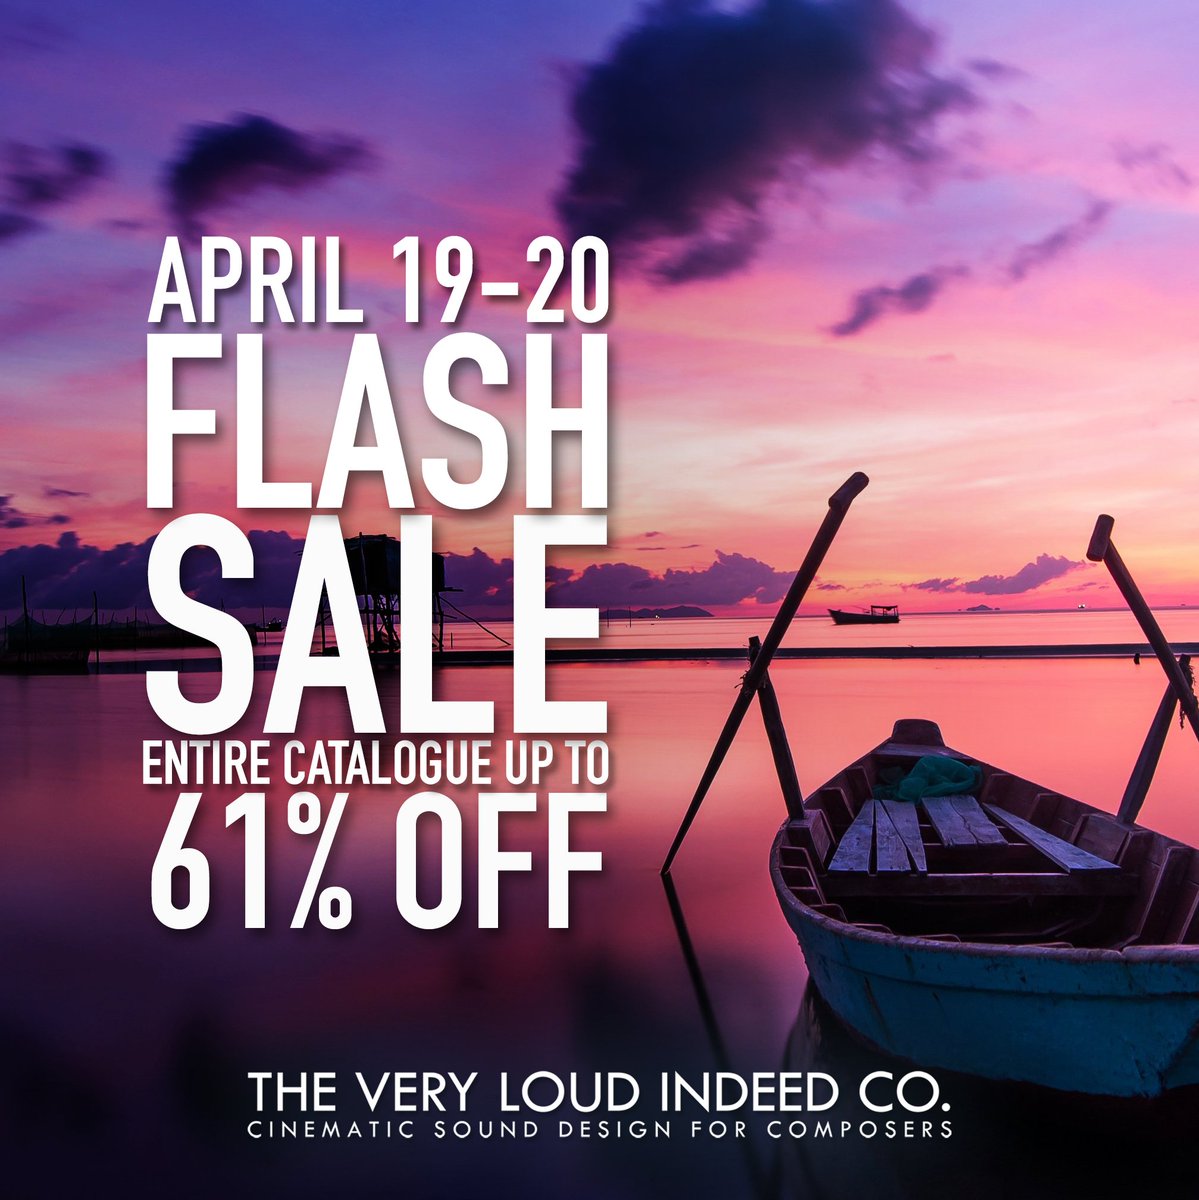 Save up to 61% on our products on April 19th and 20th at veryloudindeed.com #samplelibrary #kontakt #composer #filmcomposer #musicproducer #musicproduction #synth @uheplugins @NI_News @Spectrasonics